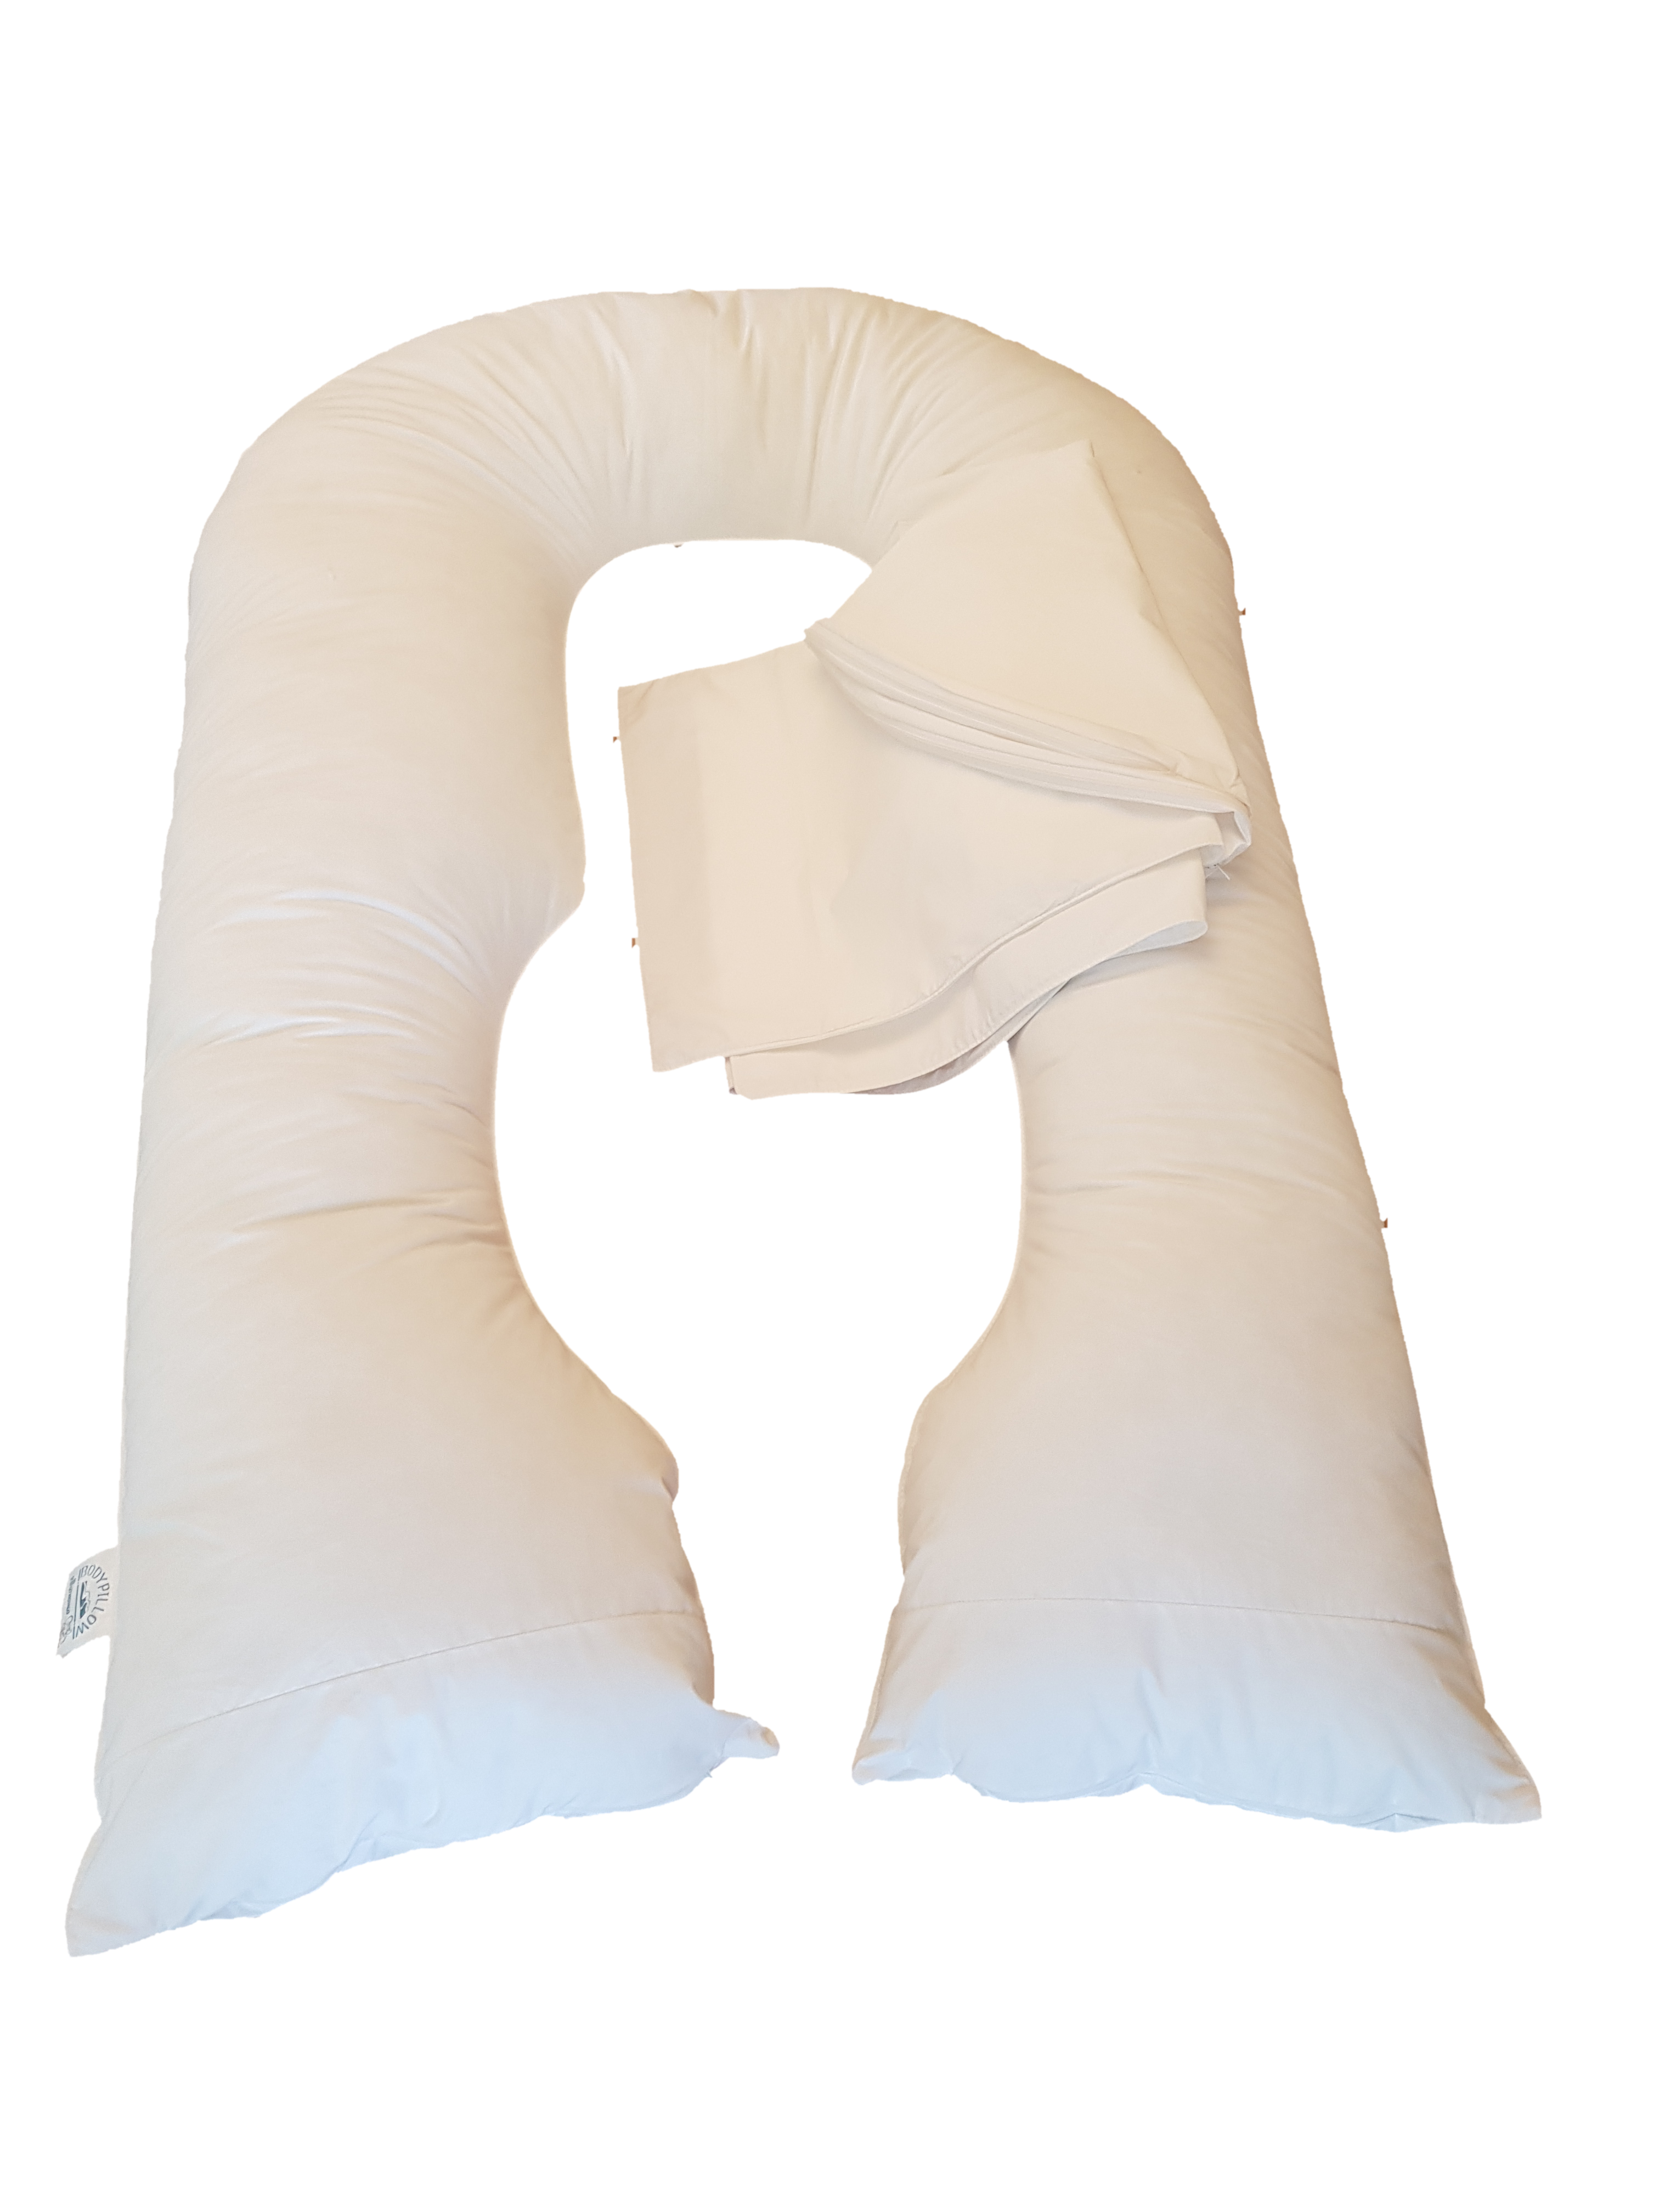 [ Huddle-Up - R1599 ] By far the largest Bodypillow in the range with an overall length in excess of 4 meters. This mammoth provides dual front and back support during pregnancy and is therefore one of the most comfortable in the range.